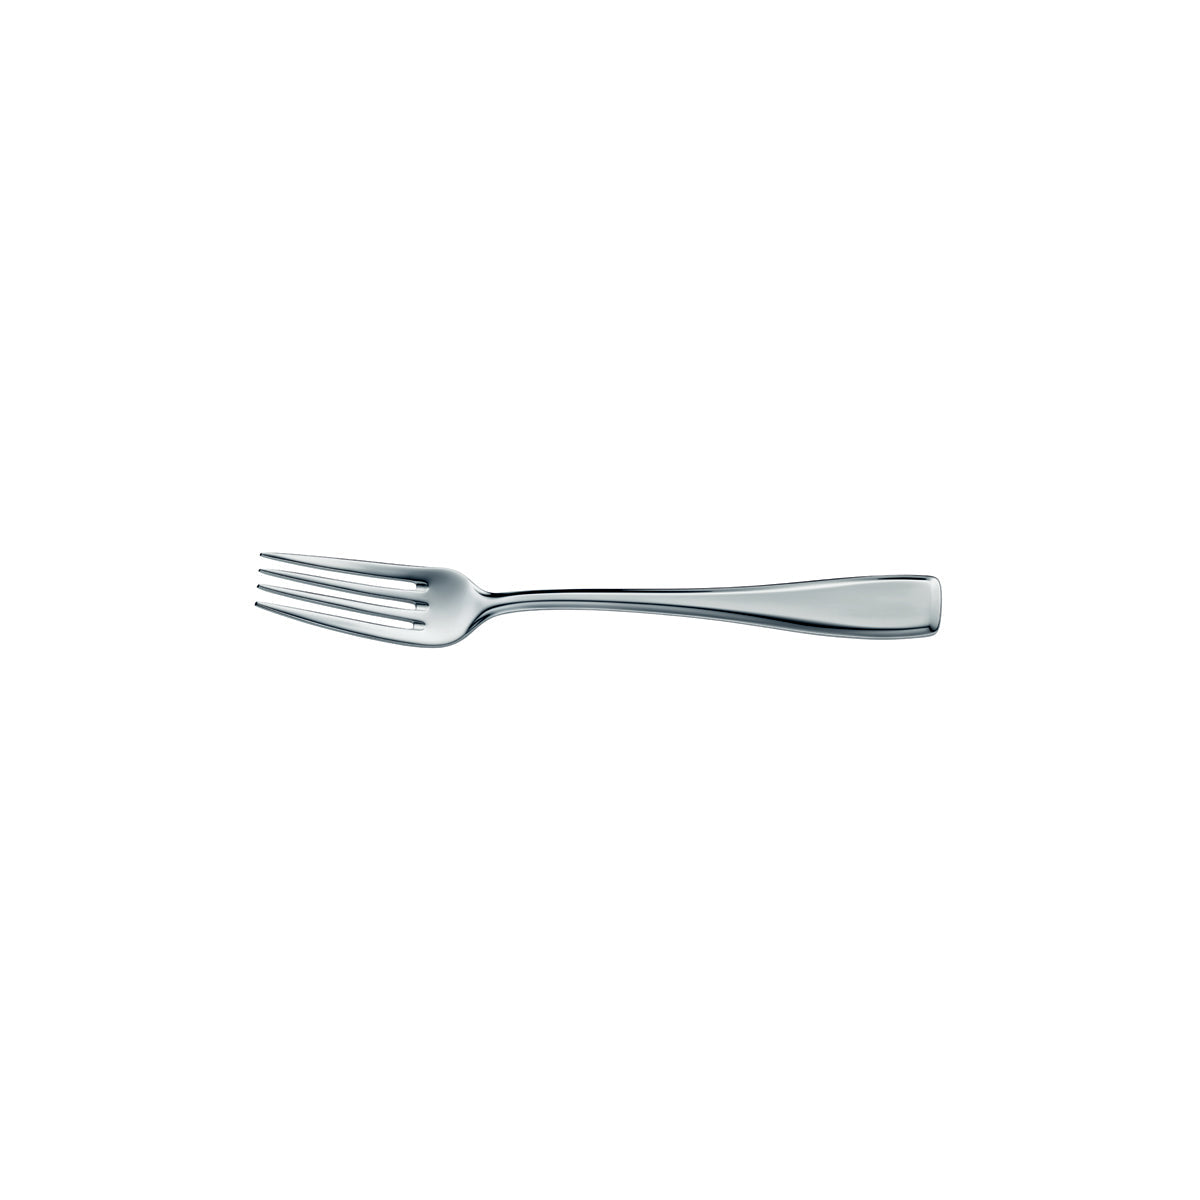 12.7902.6040 WMF Solid Table Fork Stainless Steel Tomkin Australia Hospitality Supplies